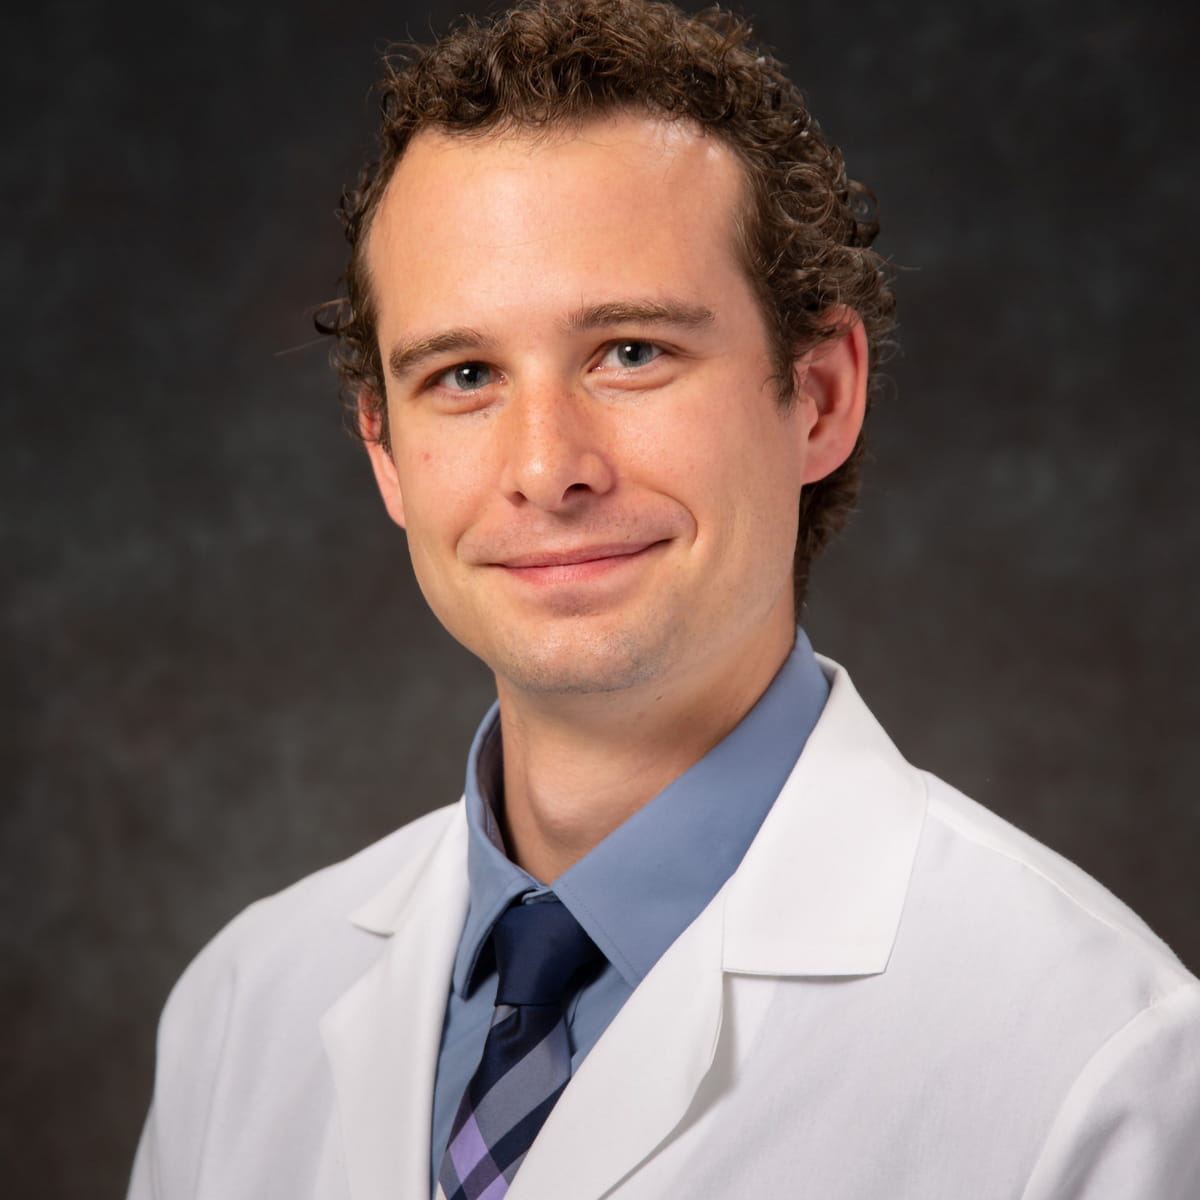 A friendly headshot of Kyle Grubbs, MD